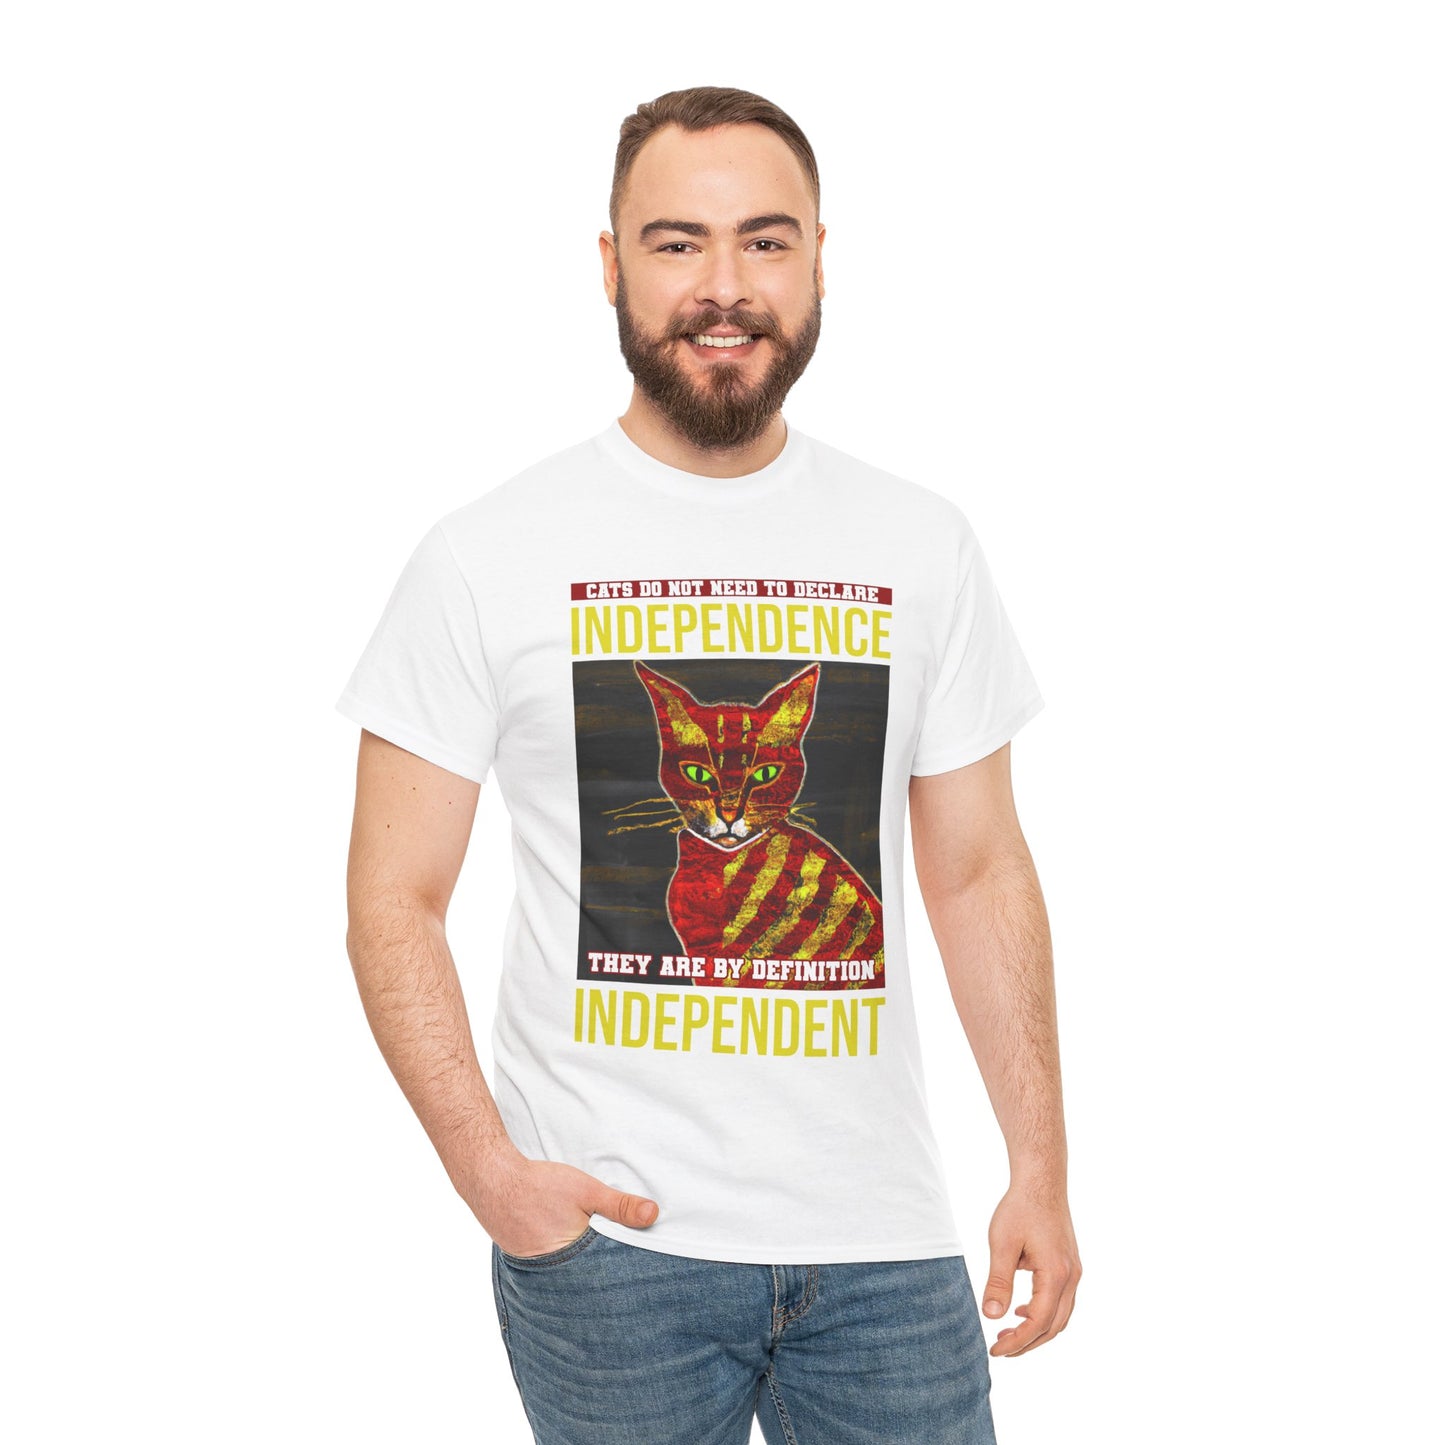 The Free Thinker T-Shirt: Cats do not need to declare independence